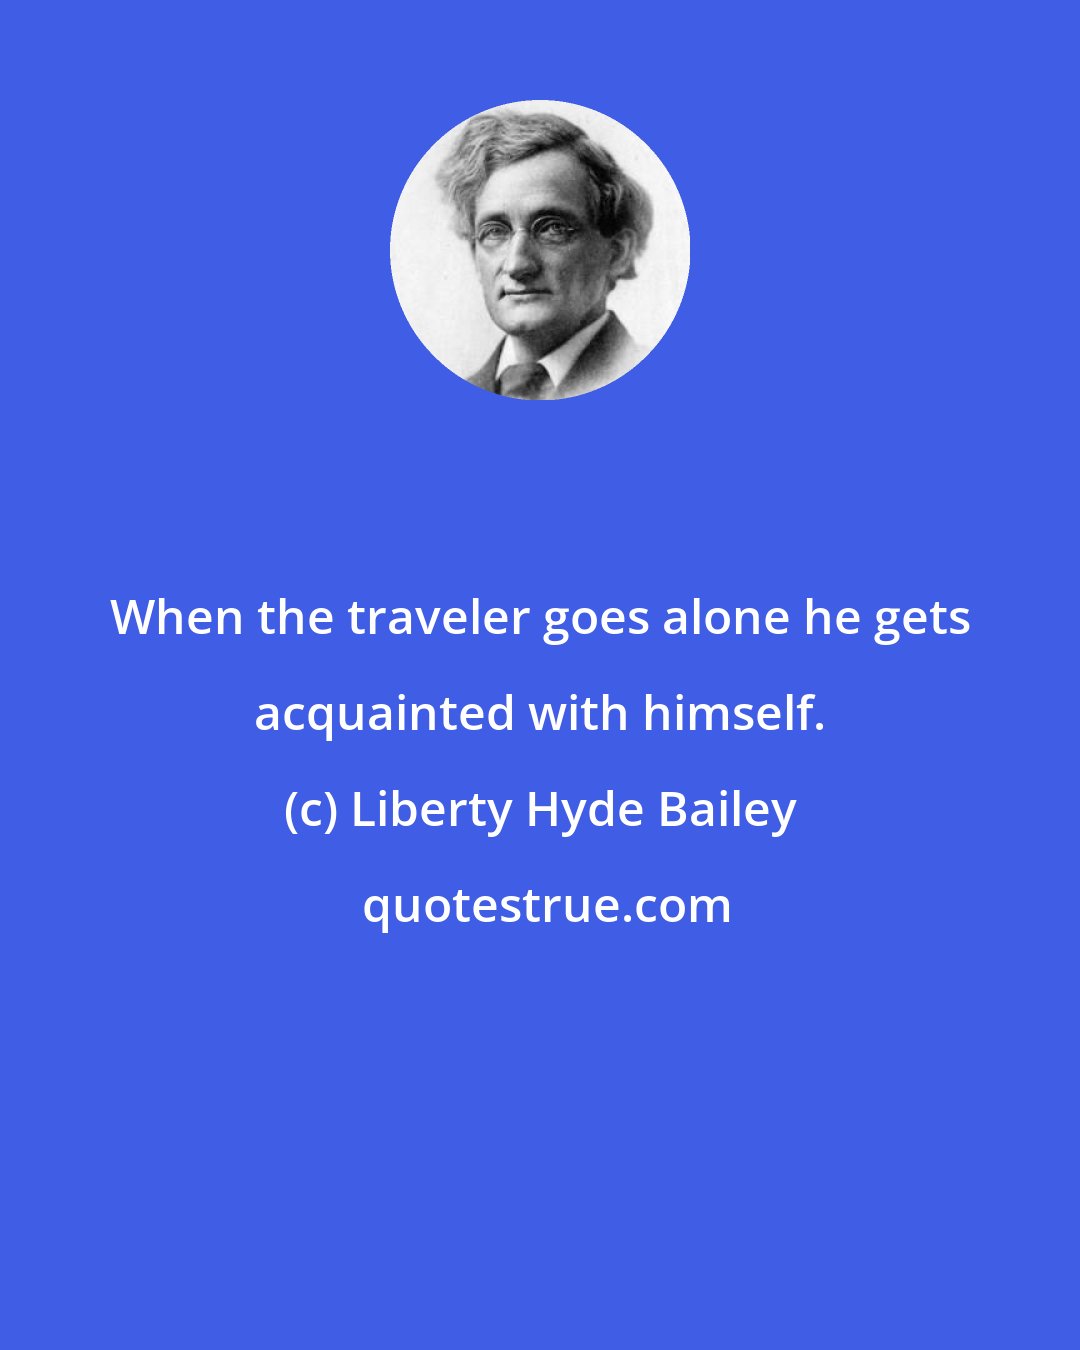 Liberty Hyde Bailey: When the traveler goes alone he gets acquainted with himself.